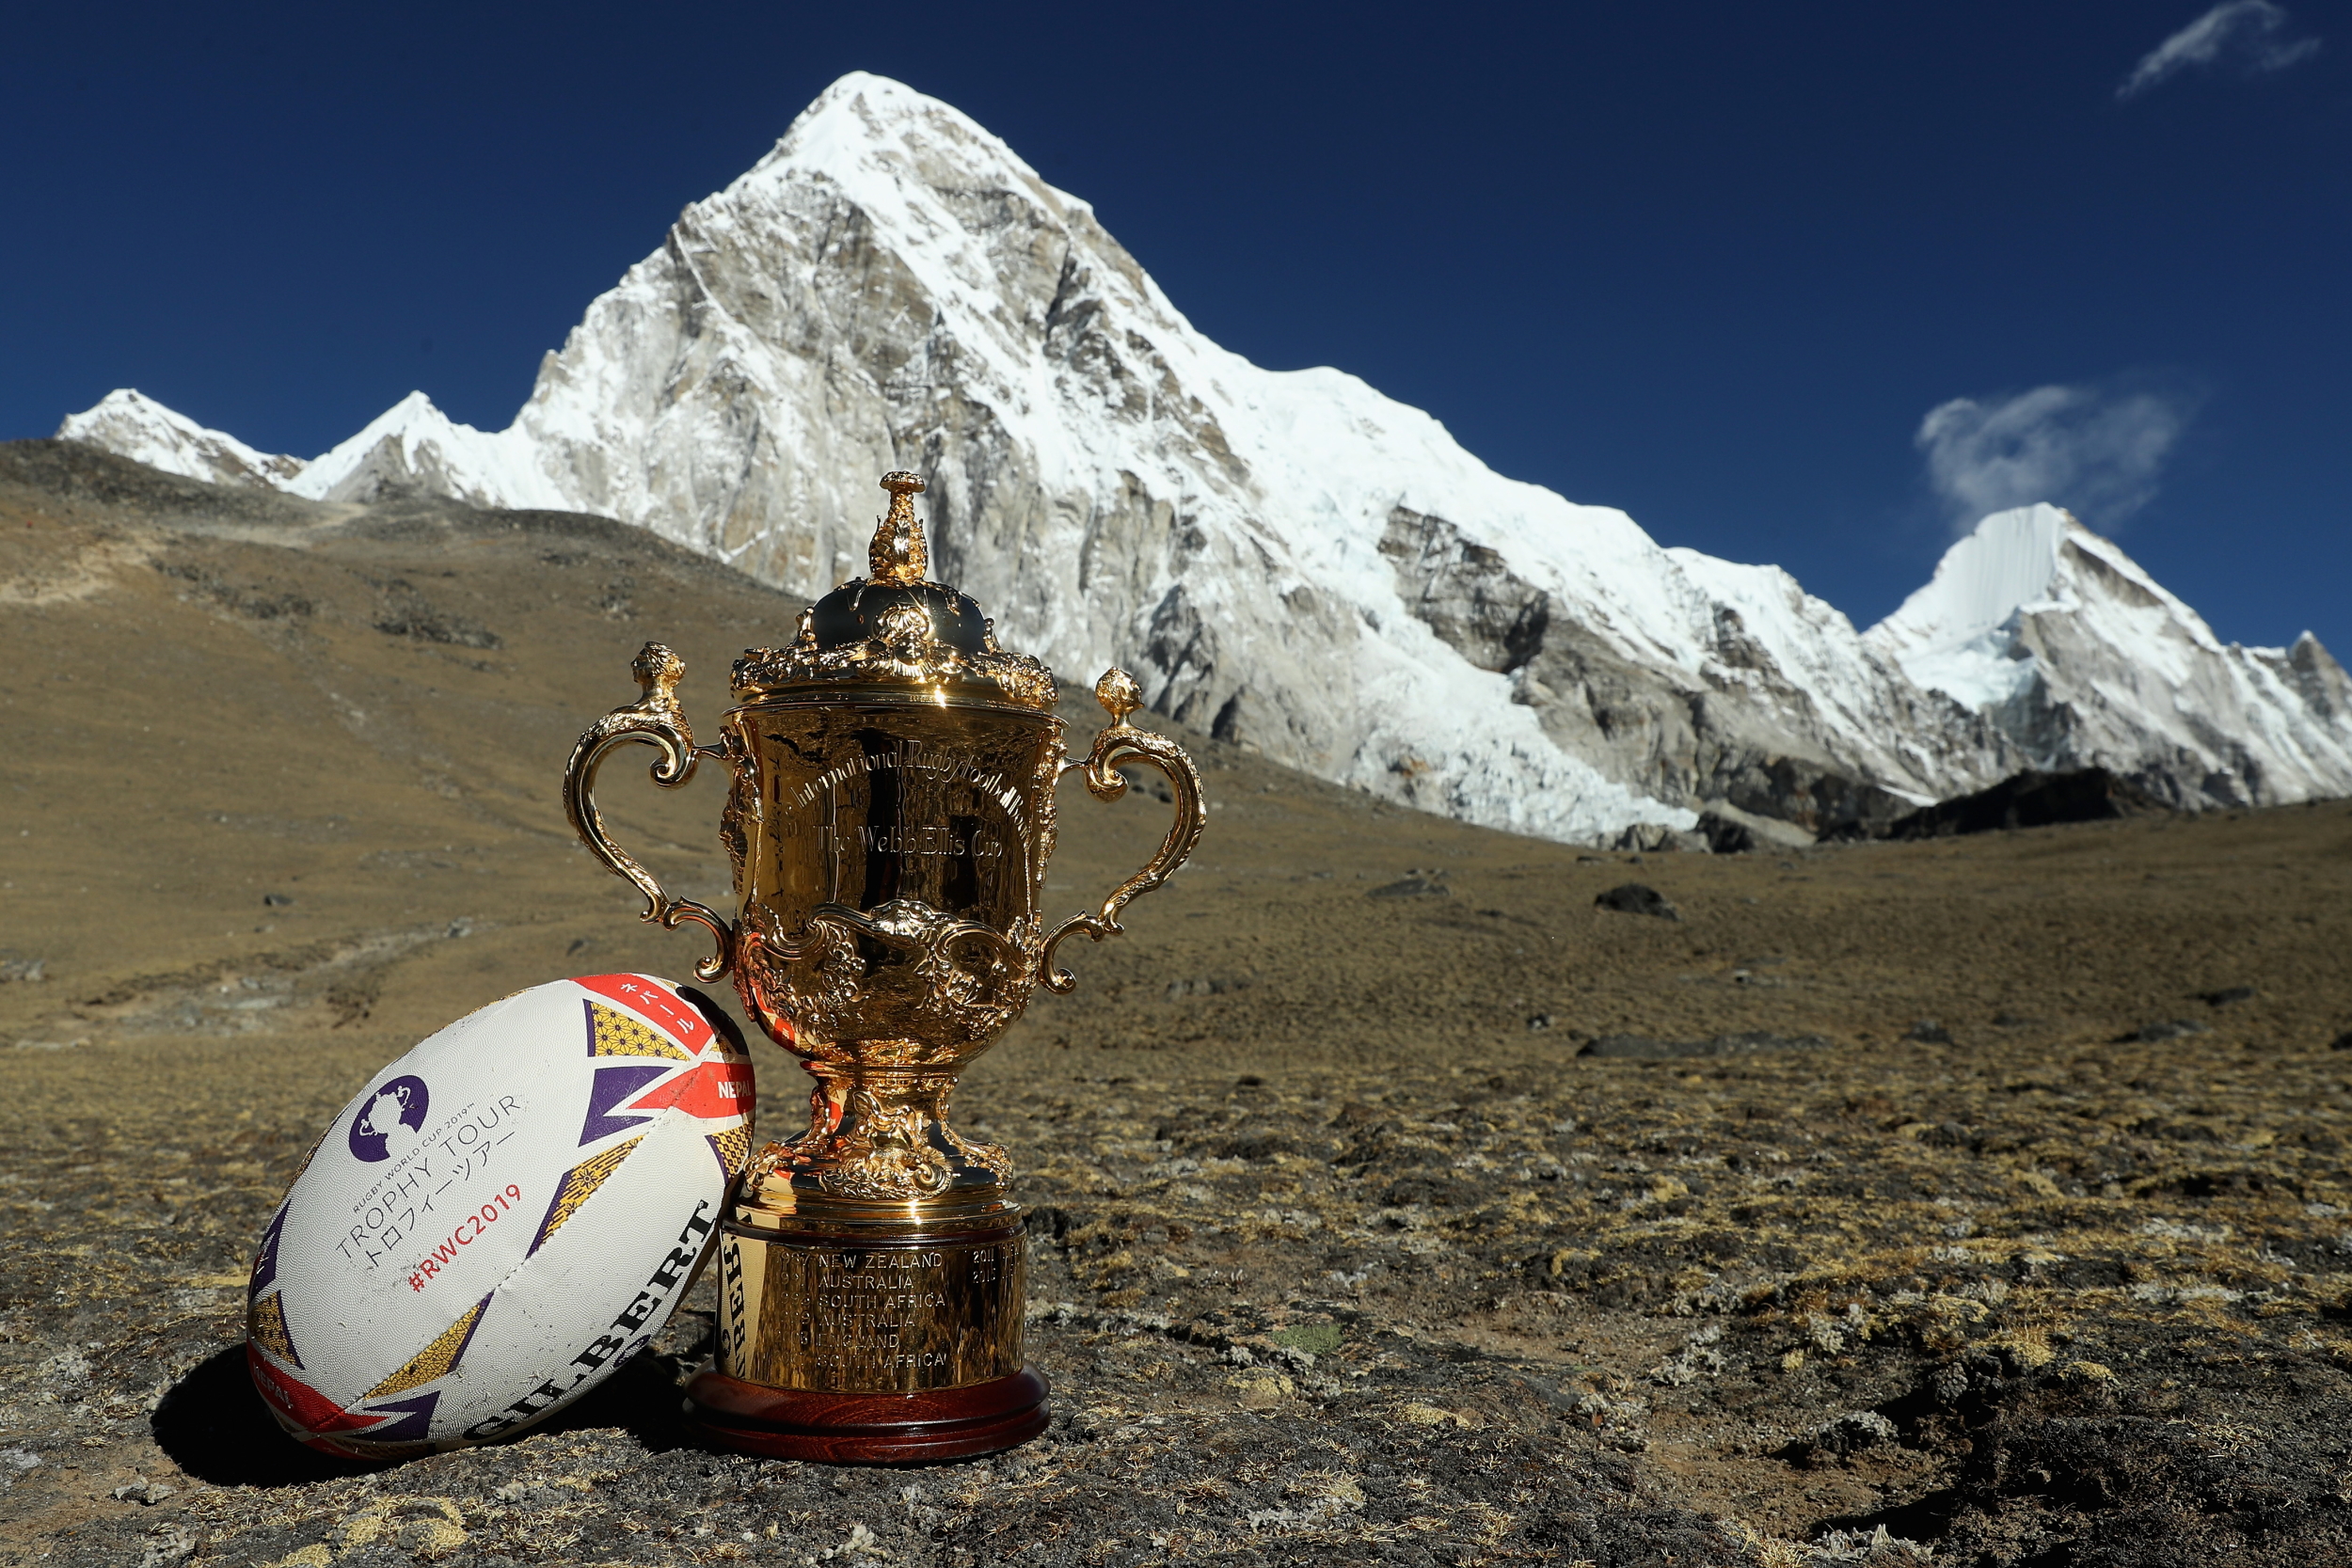 Rugby’s greatest prize, the Webb Ellis Cup, arrived in Nepal for the first time on Thursday, as the Rugby World Cup 2019 Trophy Tour reaches its final destination for 2018. The trophy scaled new heights when it travelled high above sea level to Kala Patthar (meaning ‘Black Rock’ in Nepali) in the Himalayas with England’s former World Rugby International Sevens Player of the Year, Ollie Phillips. With views across the world's highest mountain, Mount Everest, this is undoubtedly one of the most spectacular locations to have ever hosted the trophy. Click to enlarge.